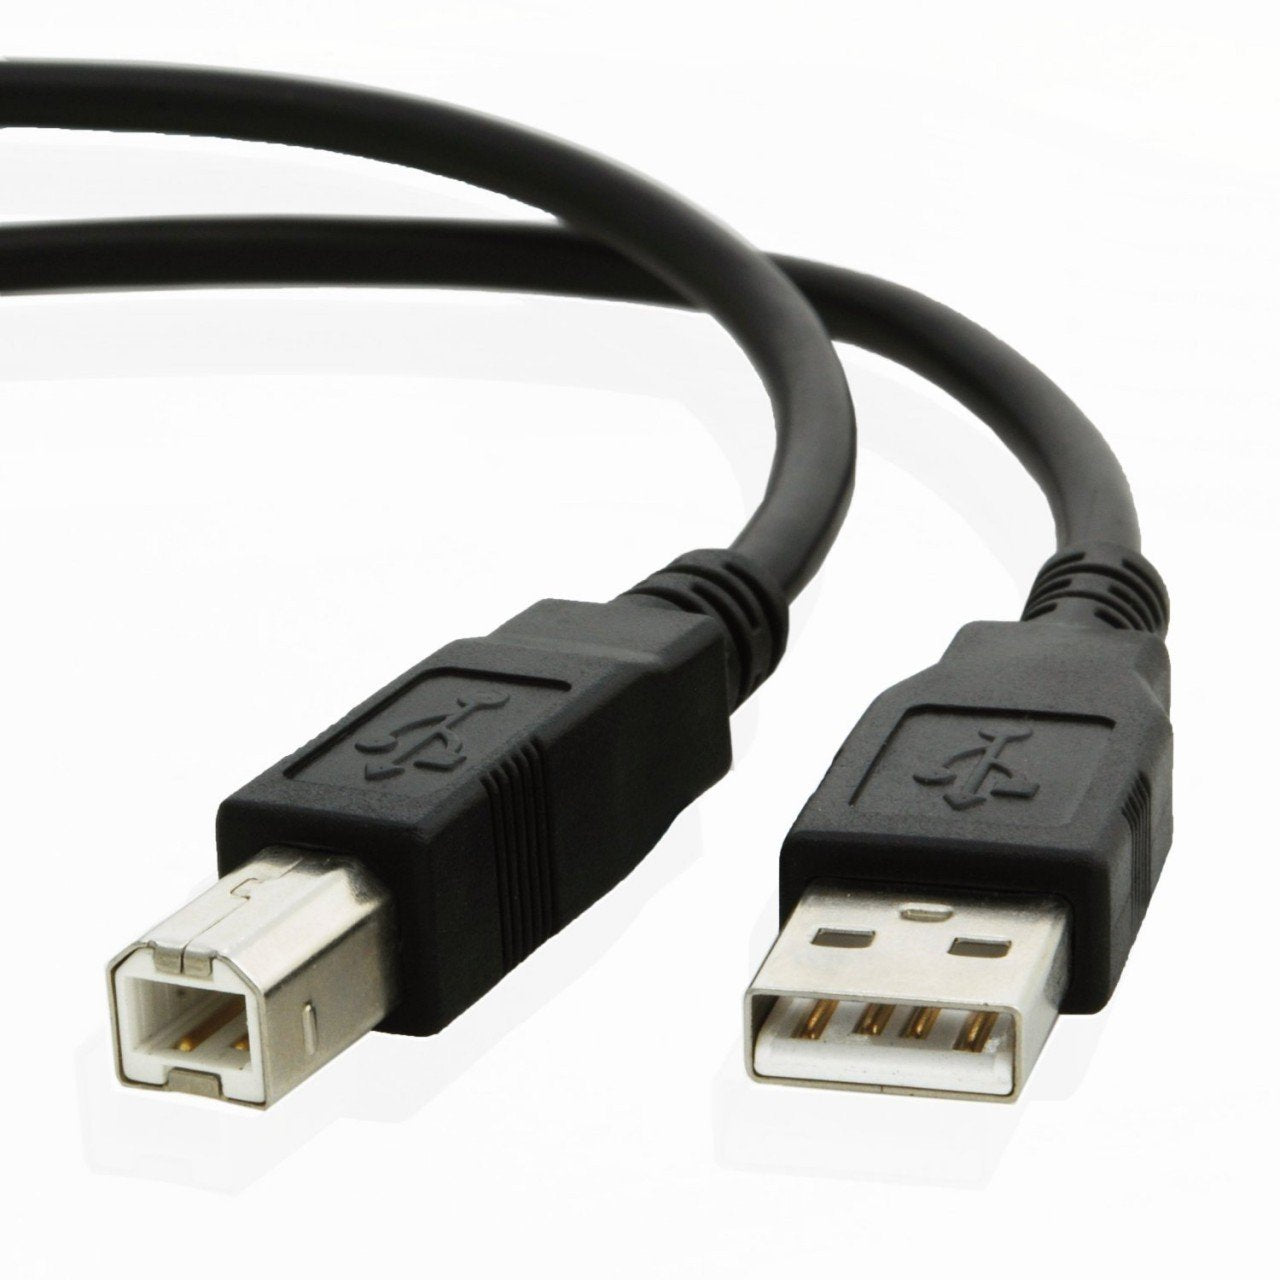 USB cable for Epson ARTISAN 1430